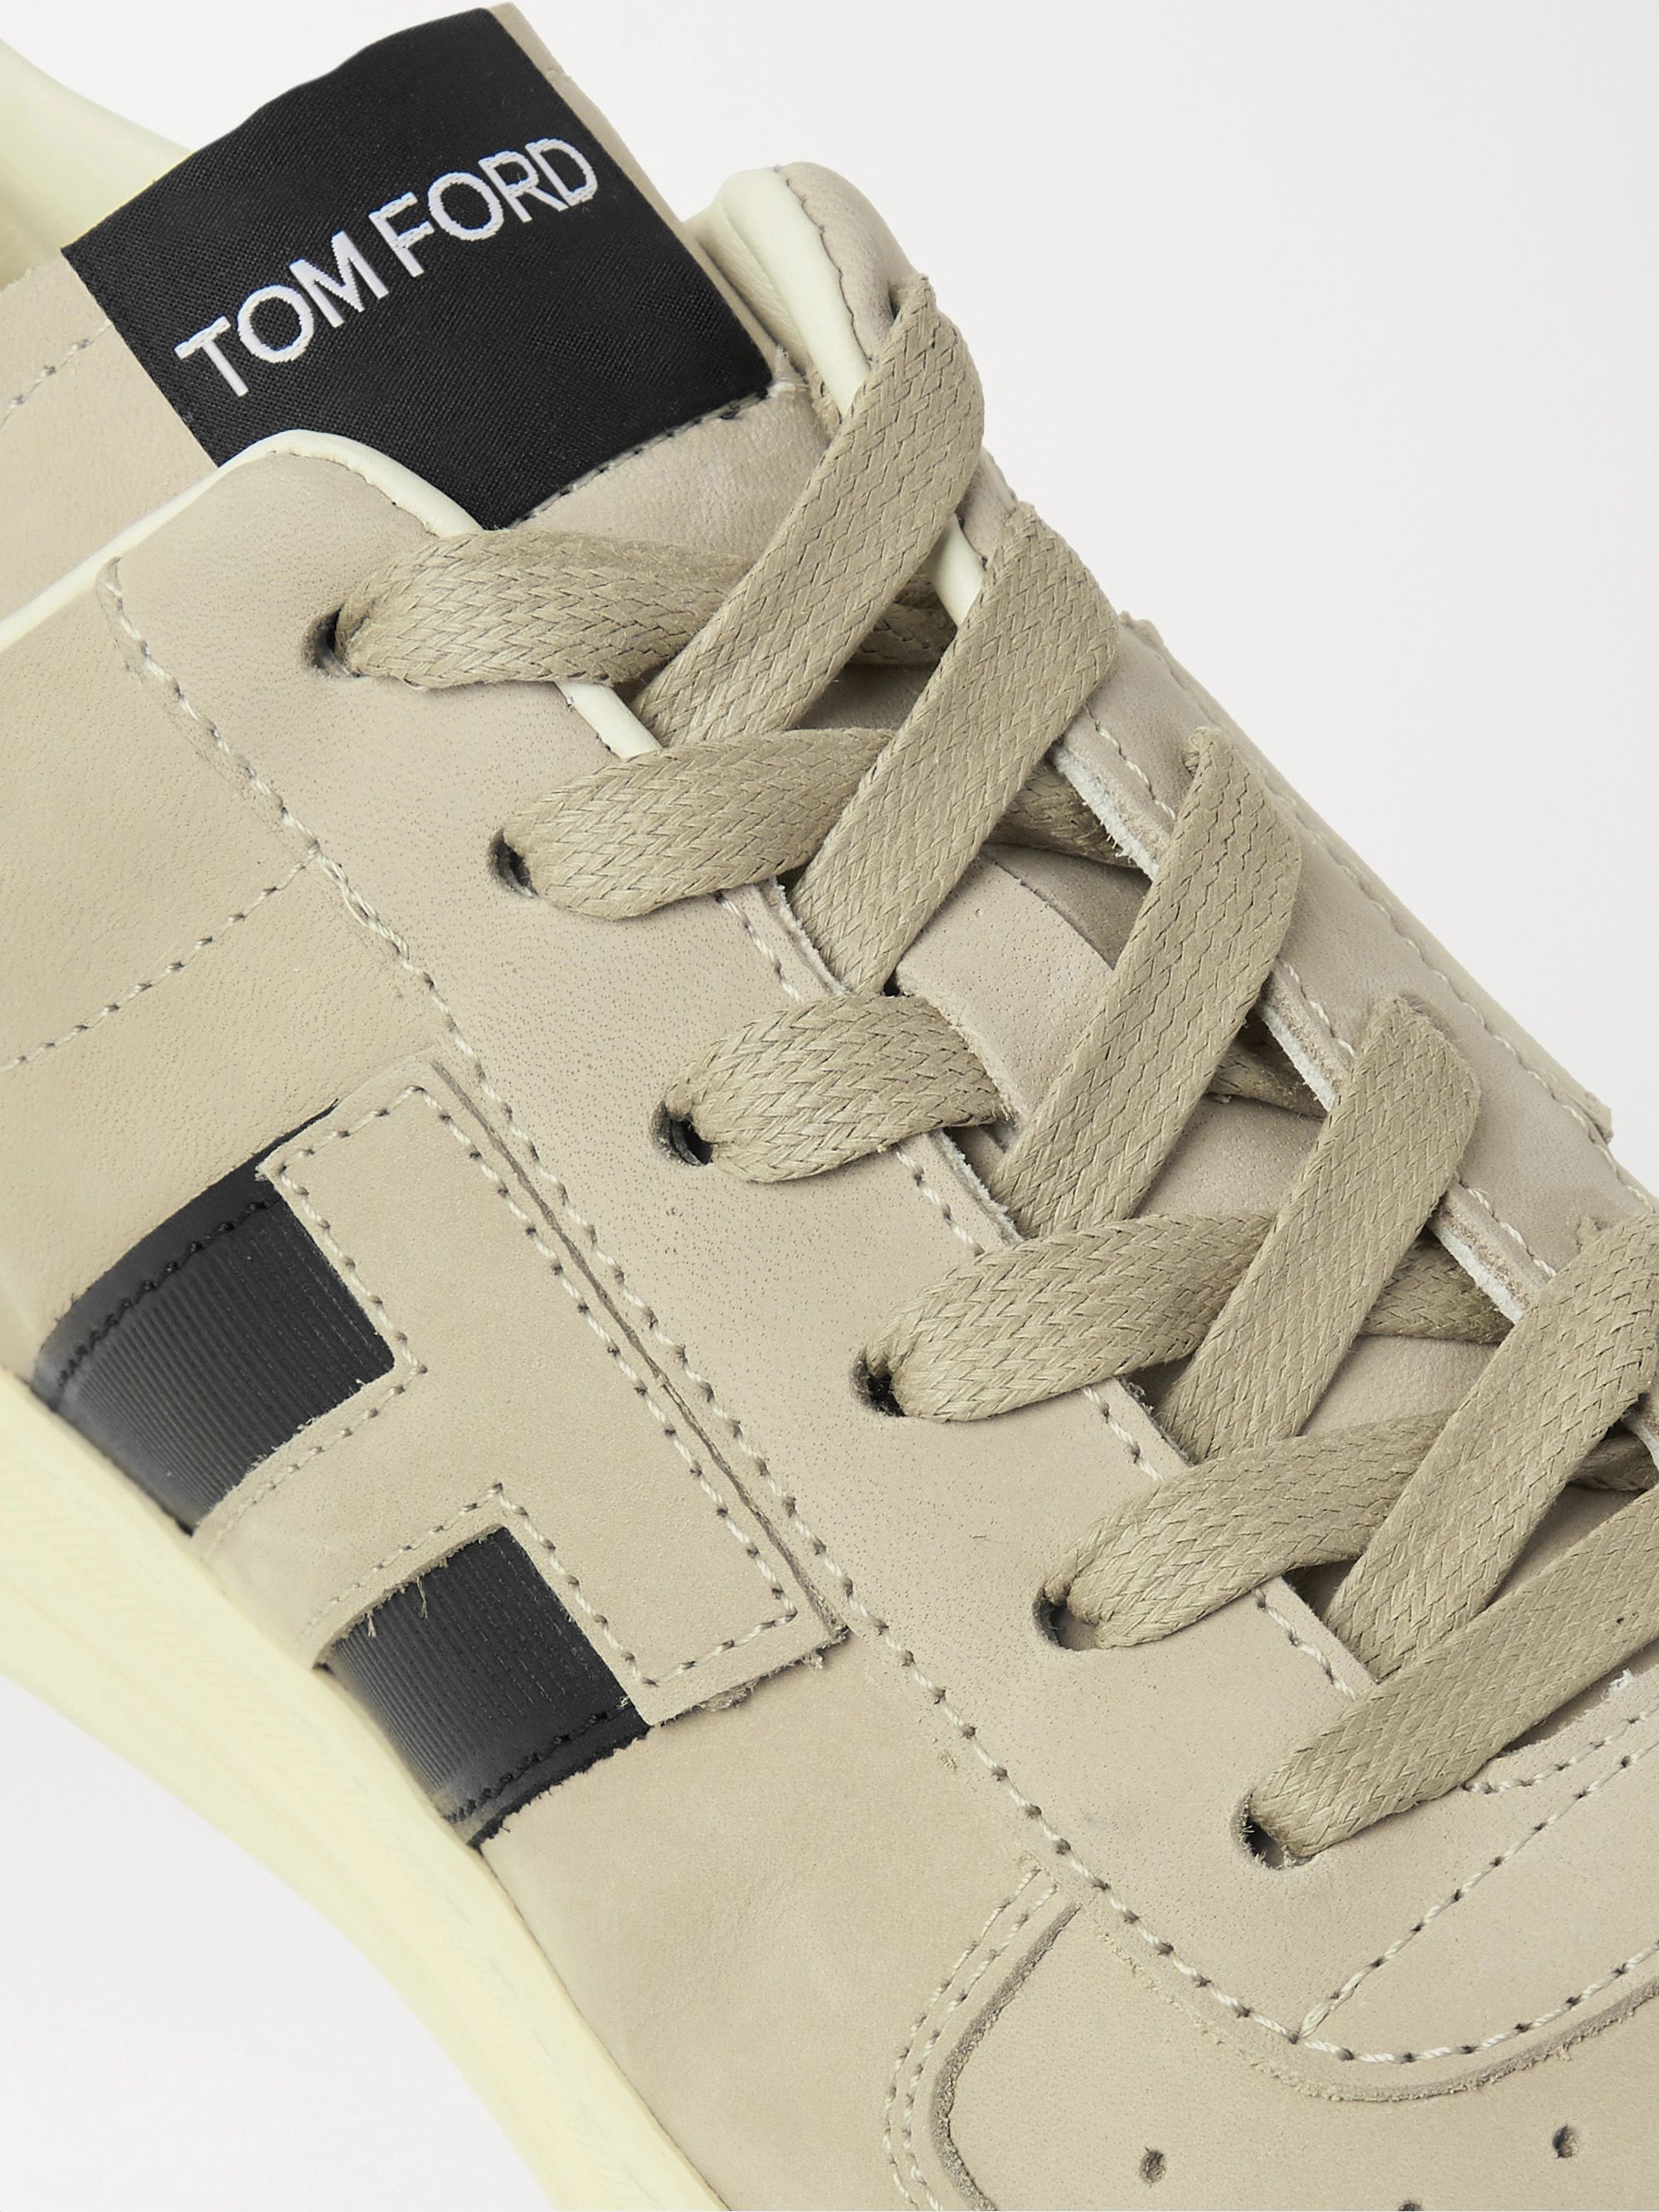 Tom Ford Radcliffe Sneakers Shop, SAVE 52% - aveclumiere.com